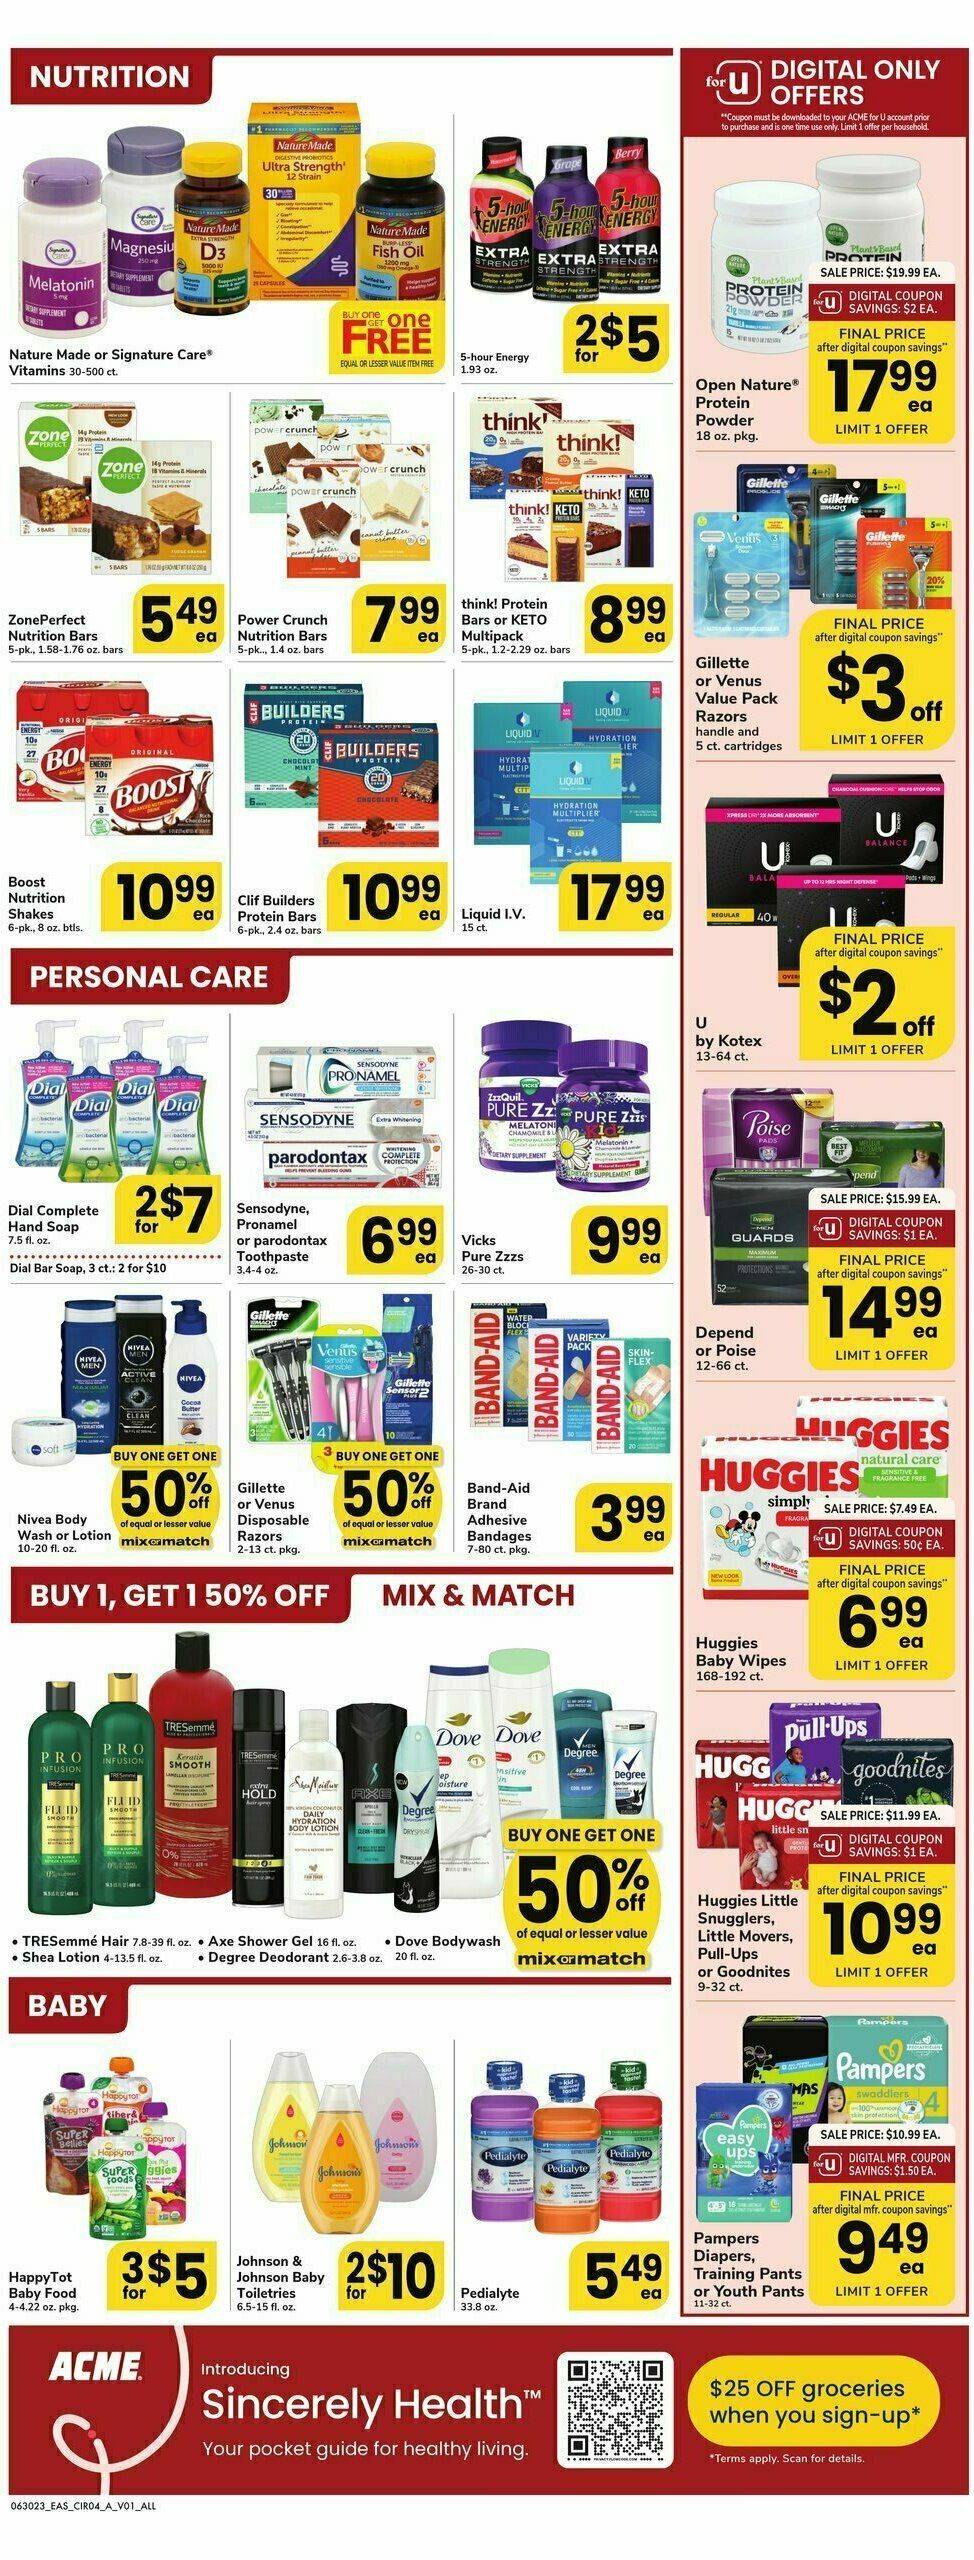 ACME Markets Weekly Ad from June 30